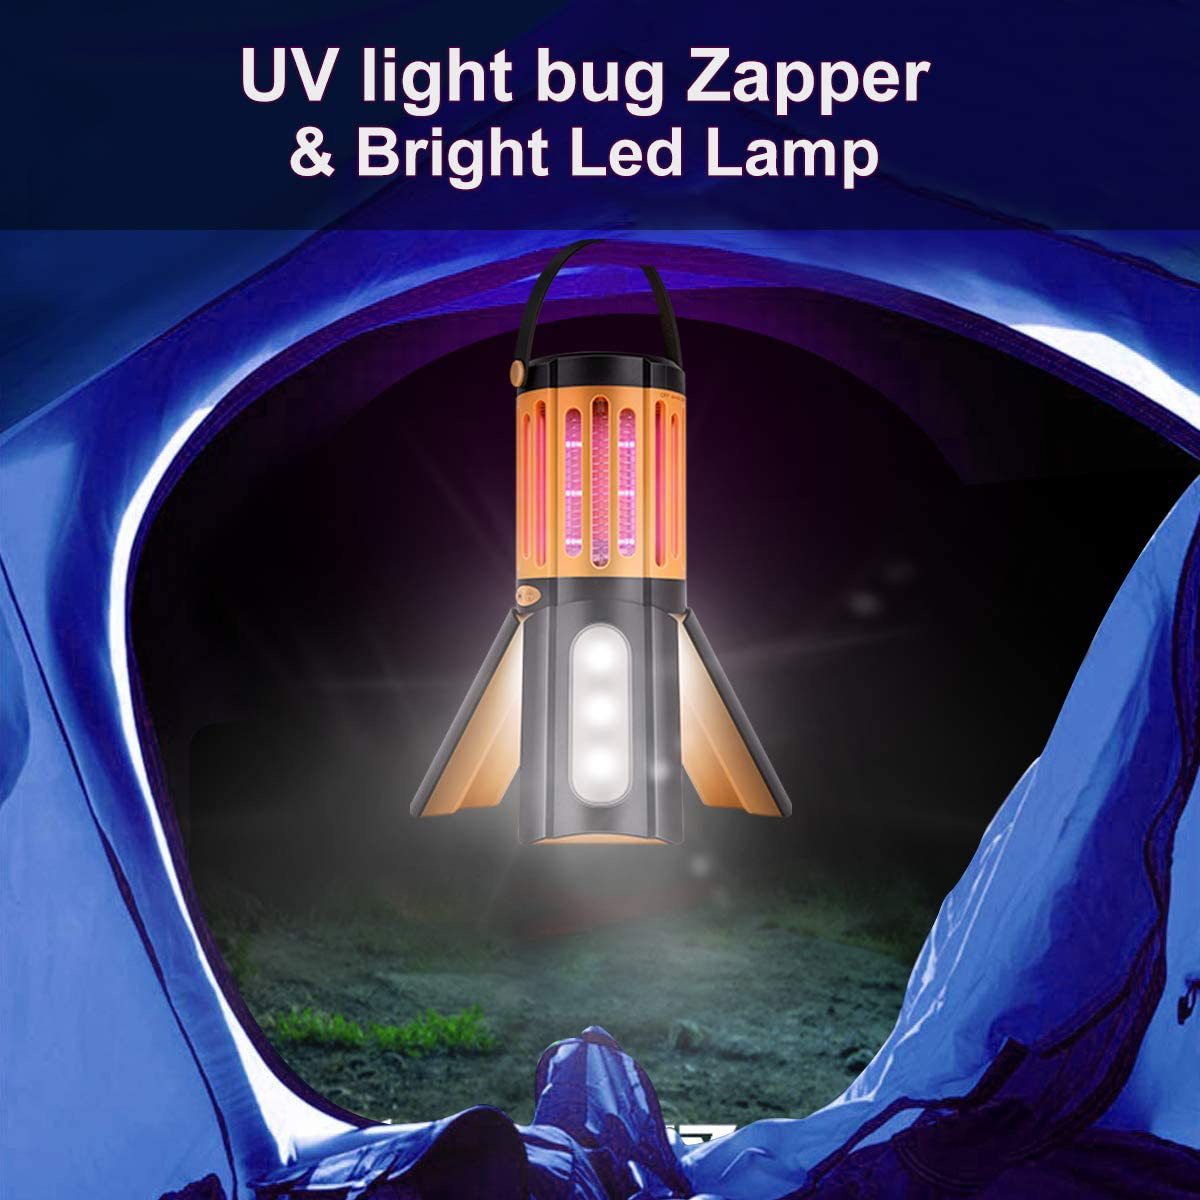 LED Camping Lantern Bug Zapper 2 in 1,Tripod Tent Light with Hook Portable Indoor Outdoor Mosquito Killer Fly Zappers Waterproof Compact UV Insect Trap Lamp